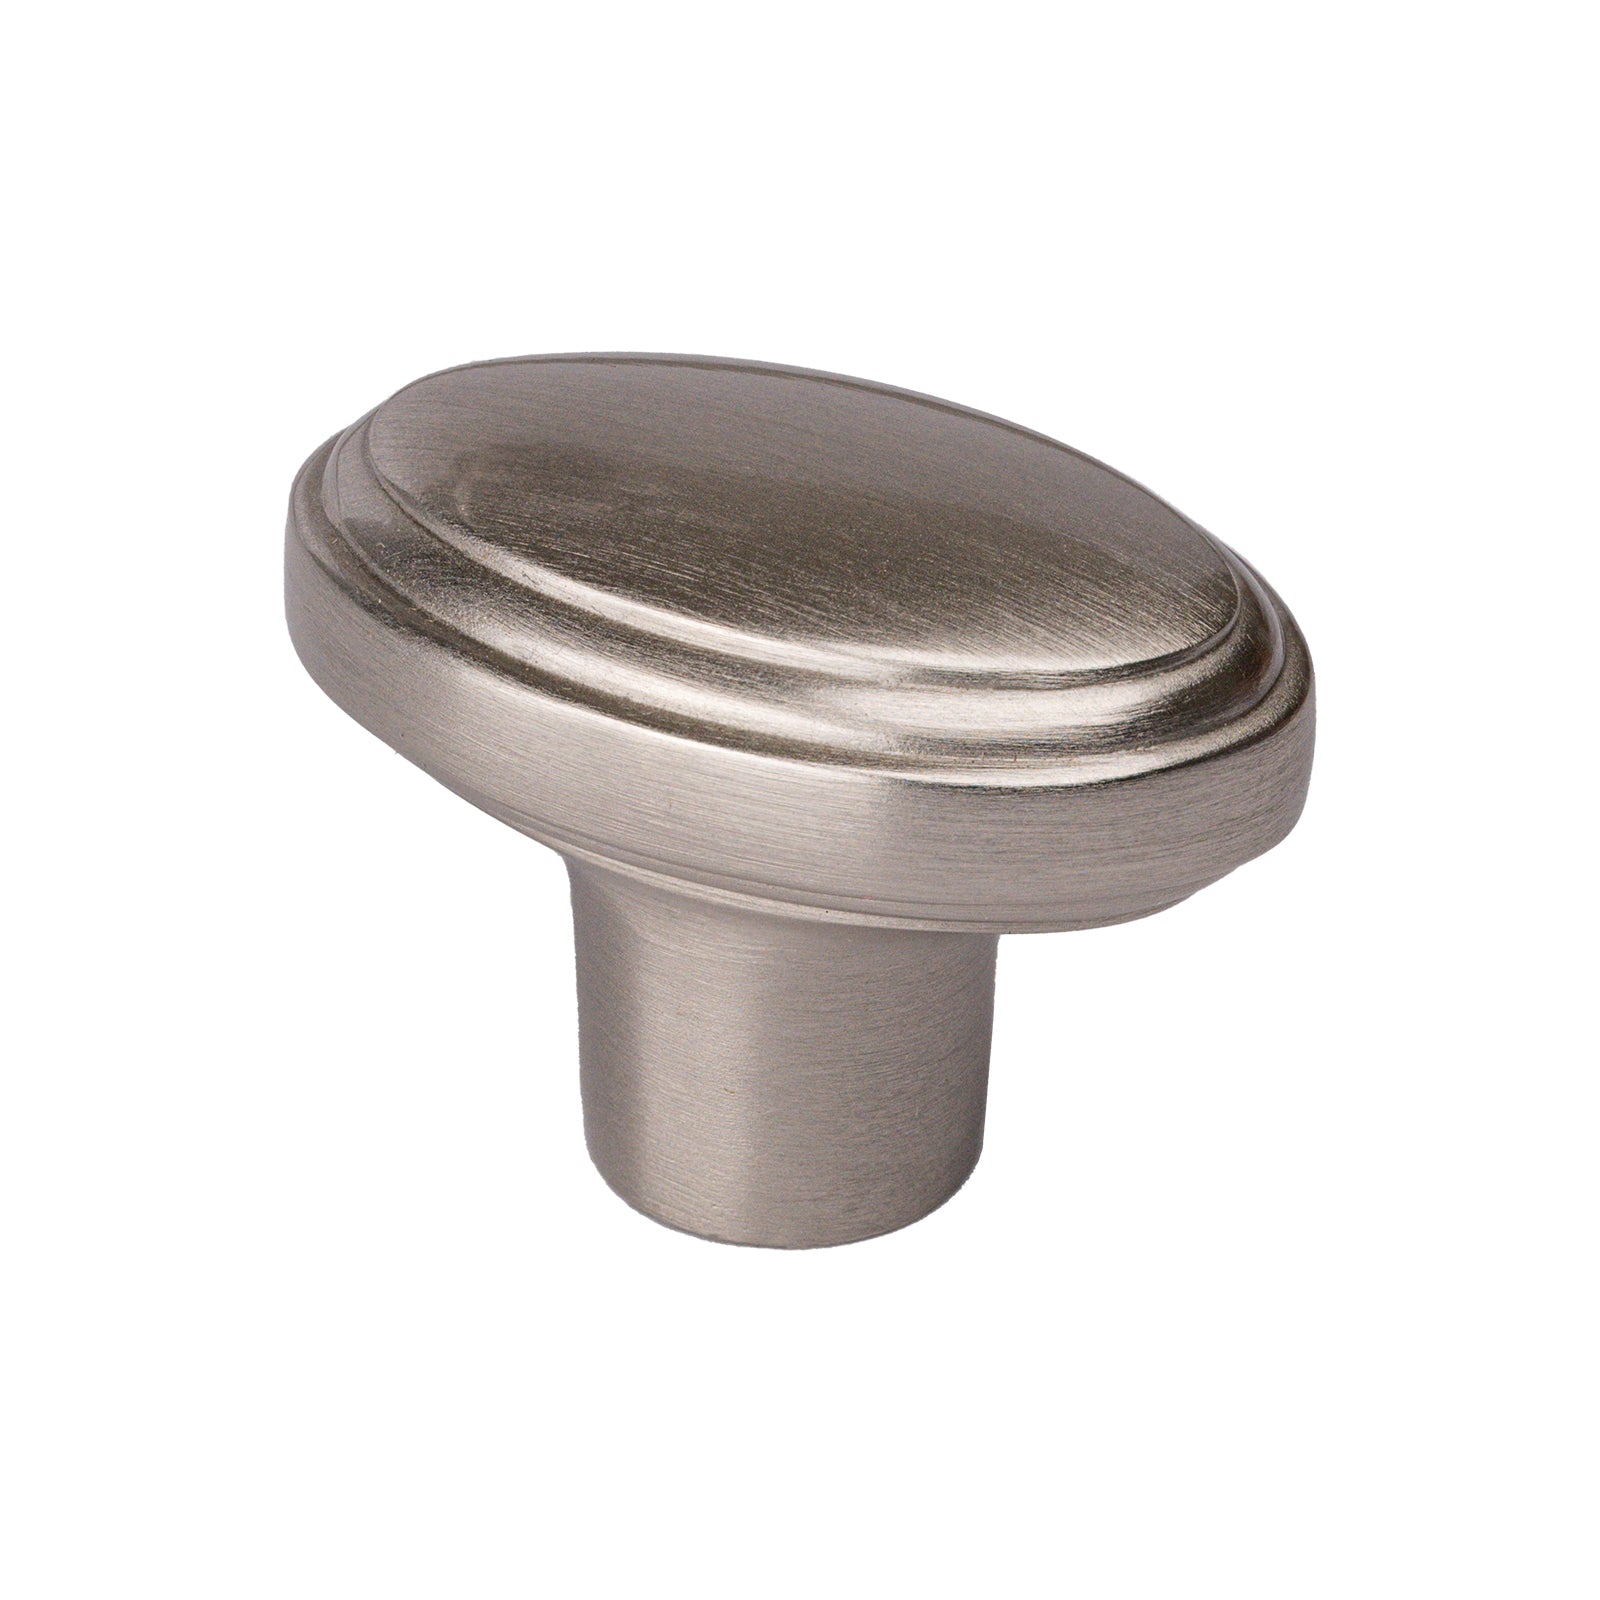 satin nickel stepped oval cabinet knobs, kitchen cupboard knobs SHOW